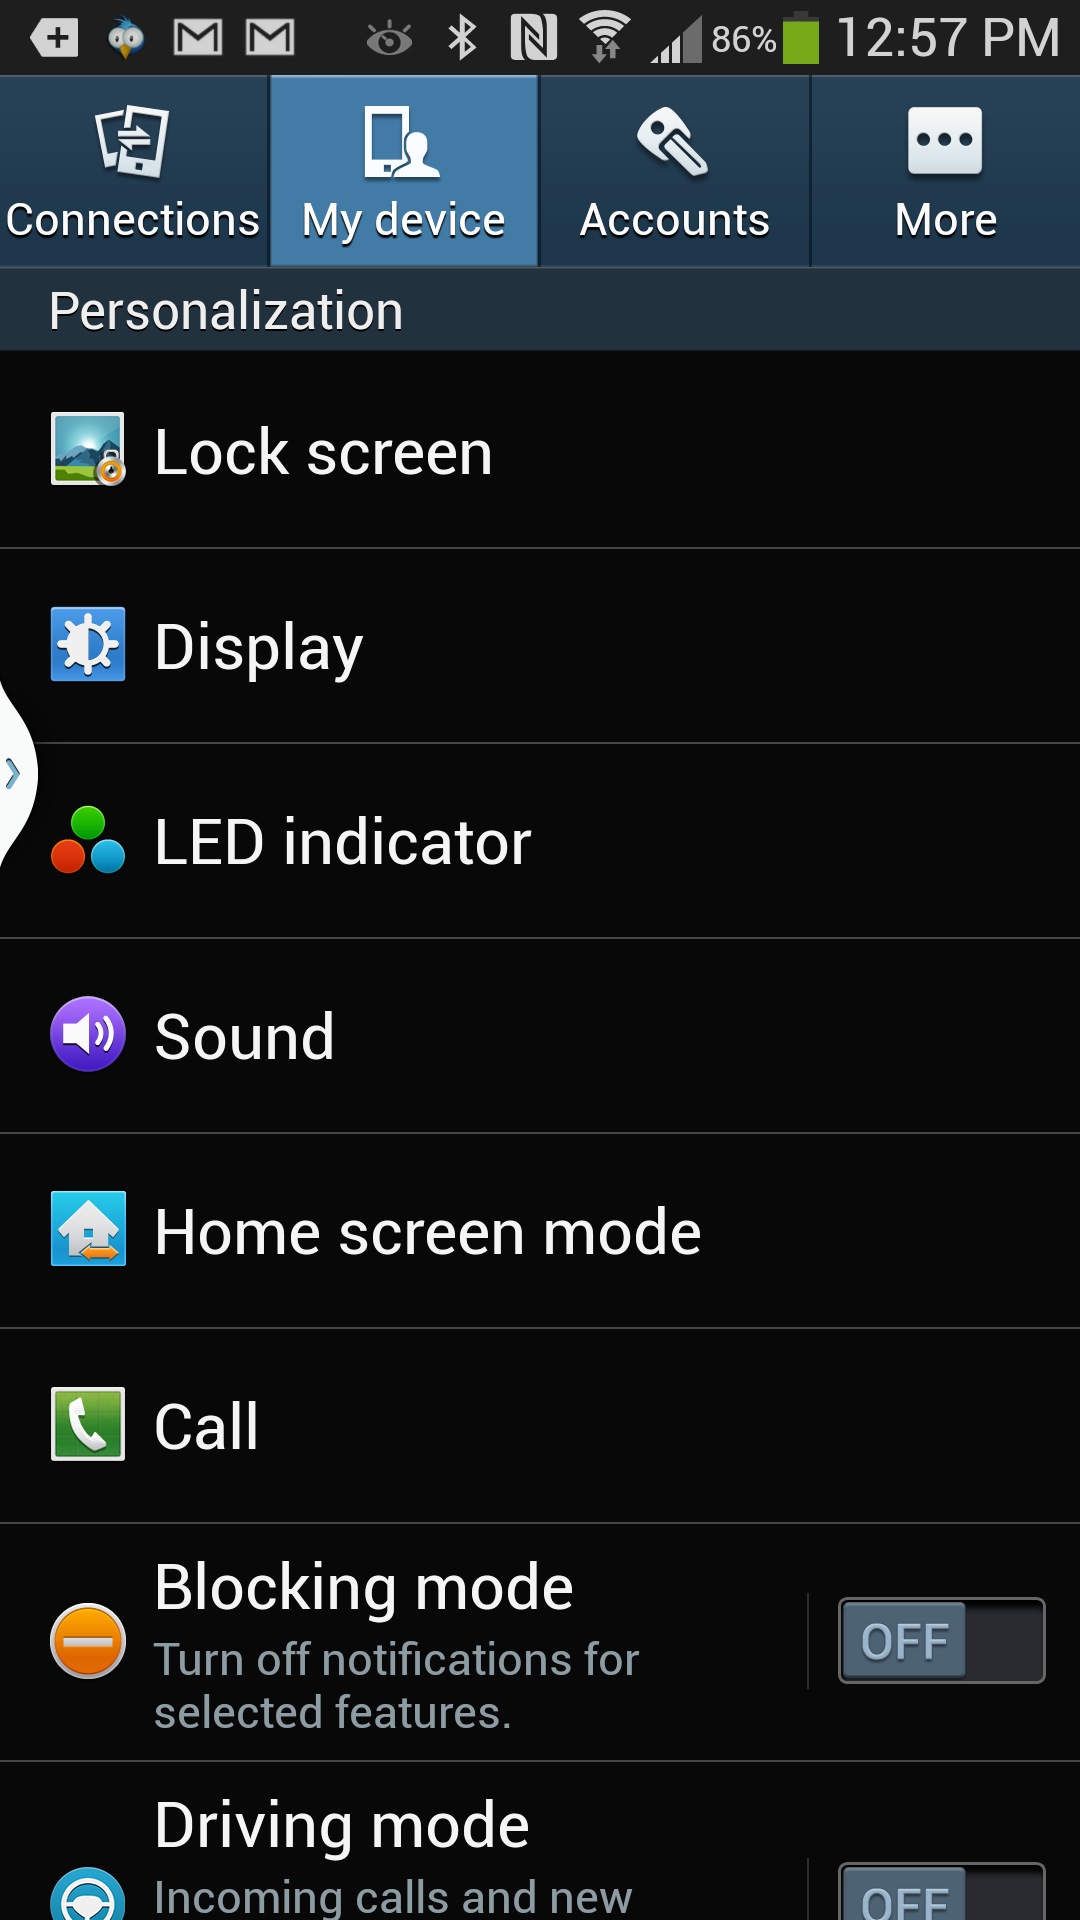 How to Use Blocking Mode on Samsung Galaxy S4